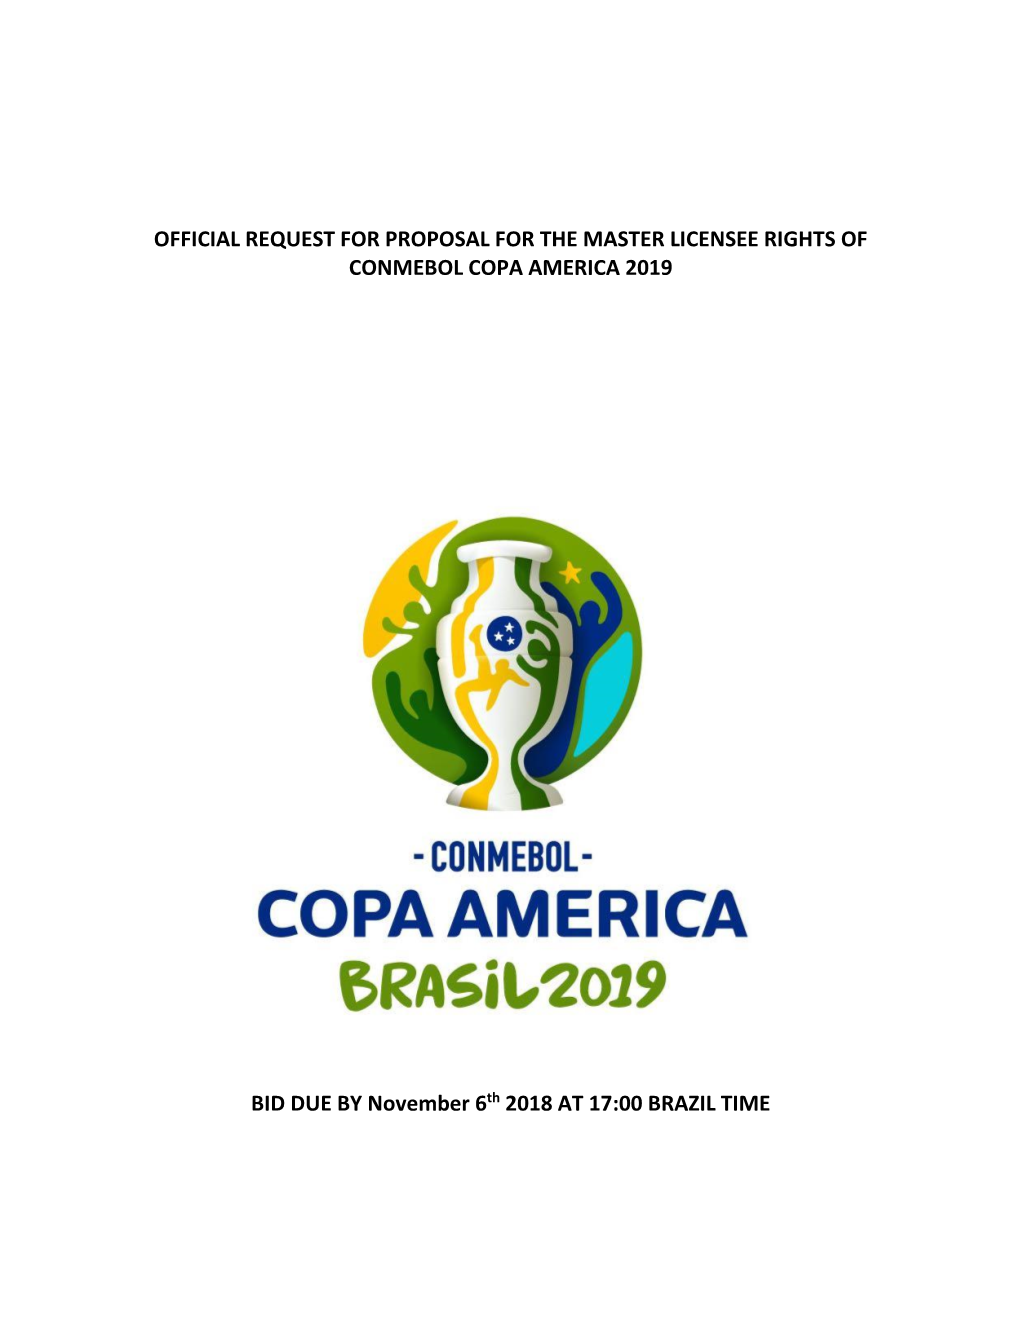 Official Request for Proposal for the Master Licensee Rights of Conmebol Copa America 2019